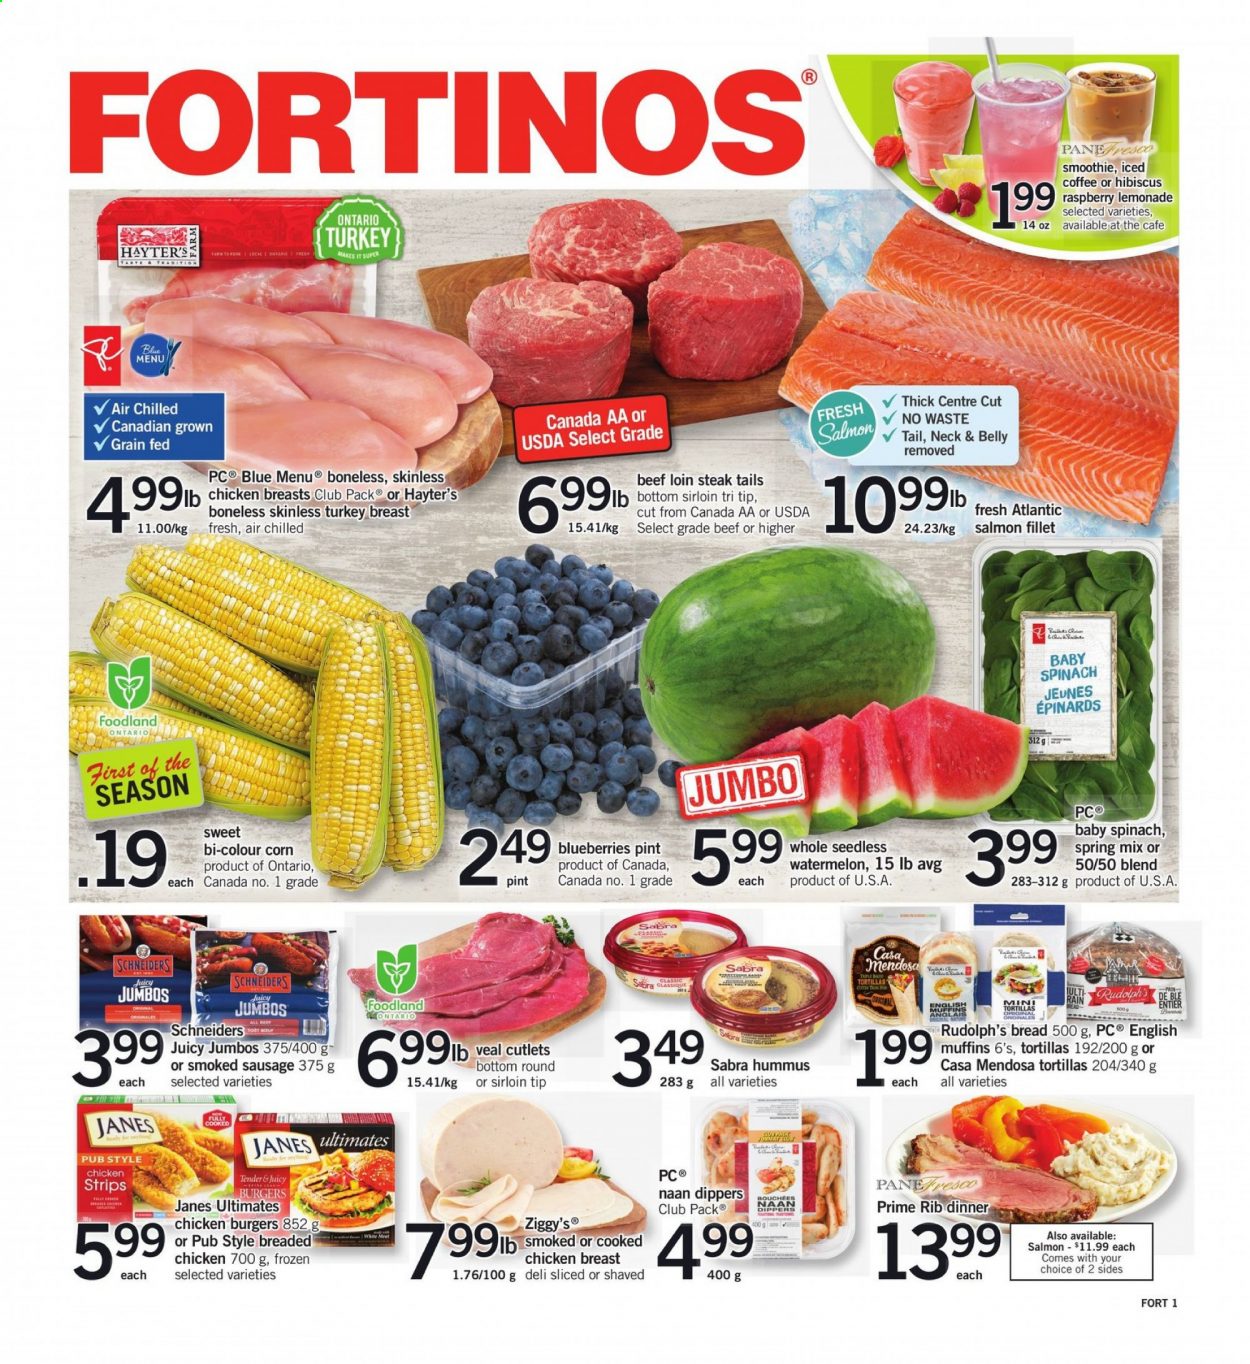 thumbnail - Fortinos Flyer - July 22, 2021 - July 28, 2021 - Sales products - bread, english muffins, tortillas, corn, spinach, blueberries, watermelon, salmon, salmon fillet, hamburger, fried chicken, sausage, smoked sausage, hummus, strips, lemonade, smoothie, iced coffee, turkey breast, chicken, turkey, veal cutlet, veal meat, AVG, steak. Page 1.